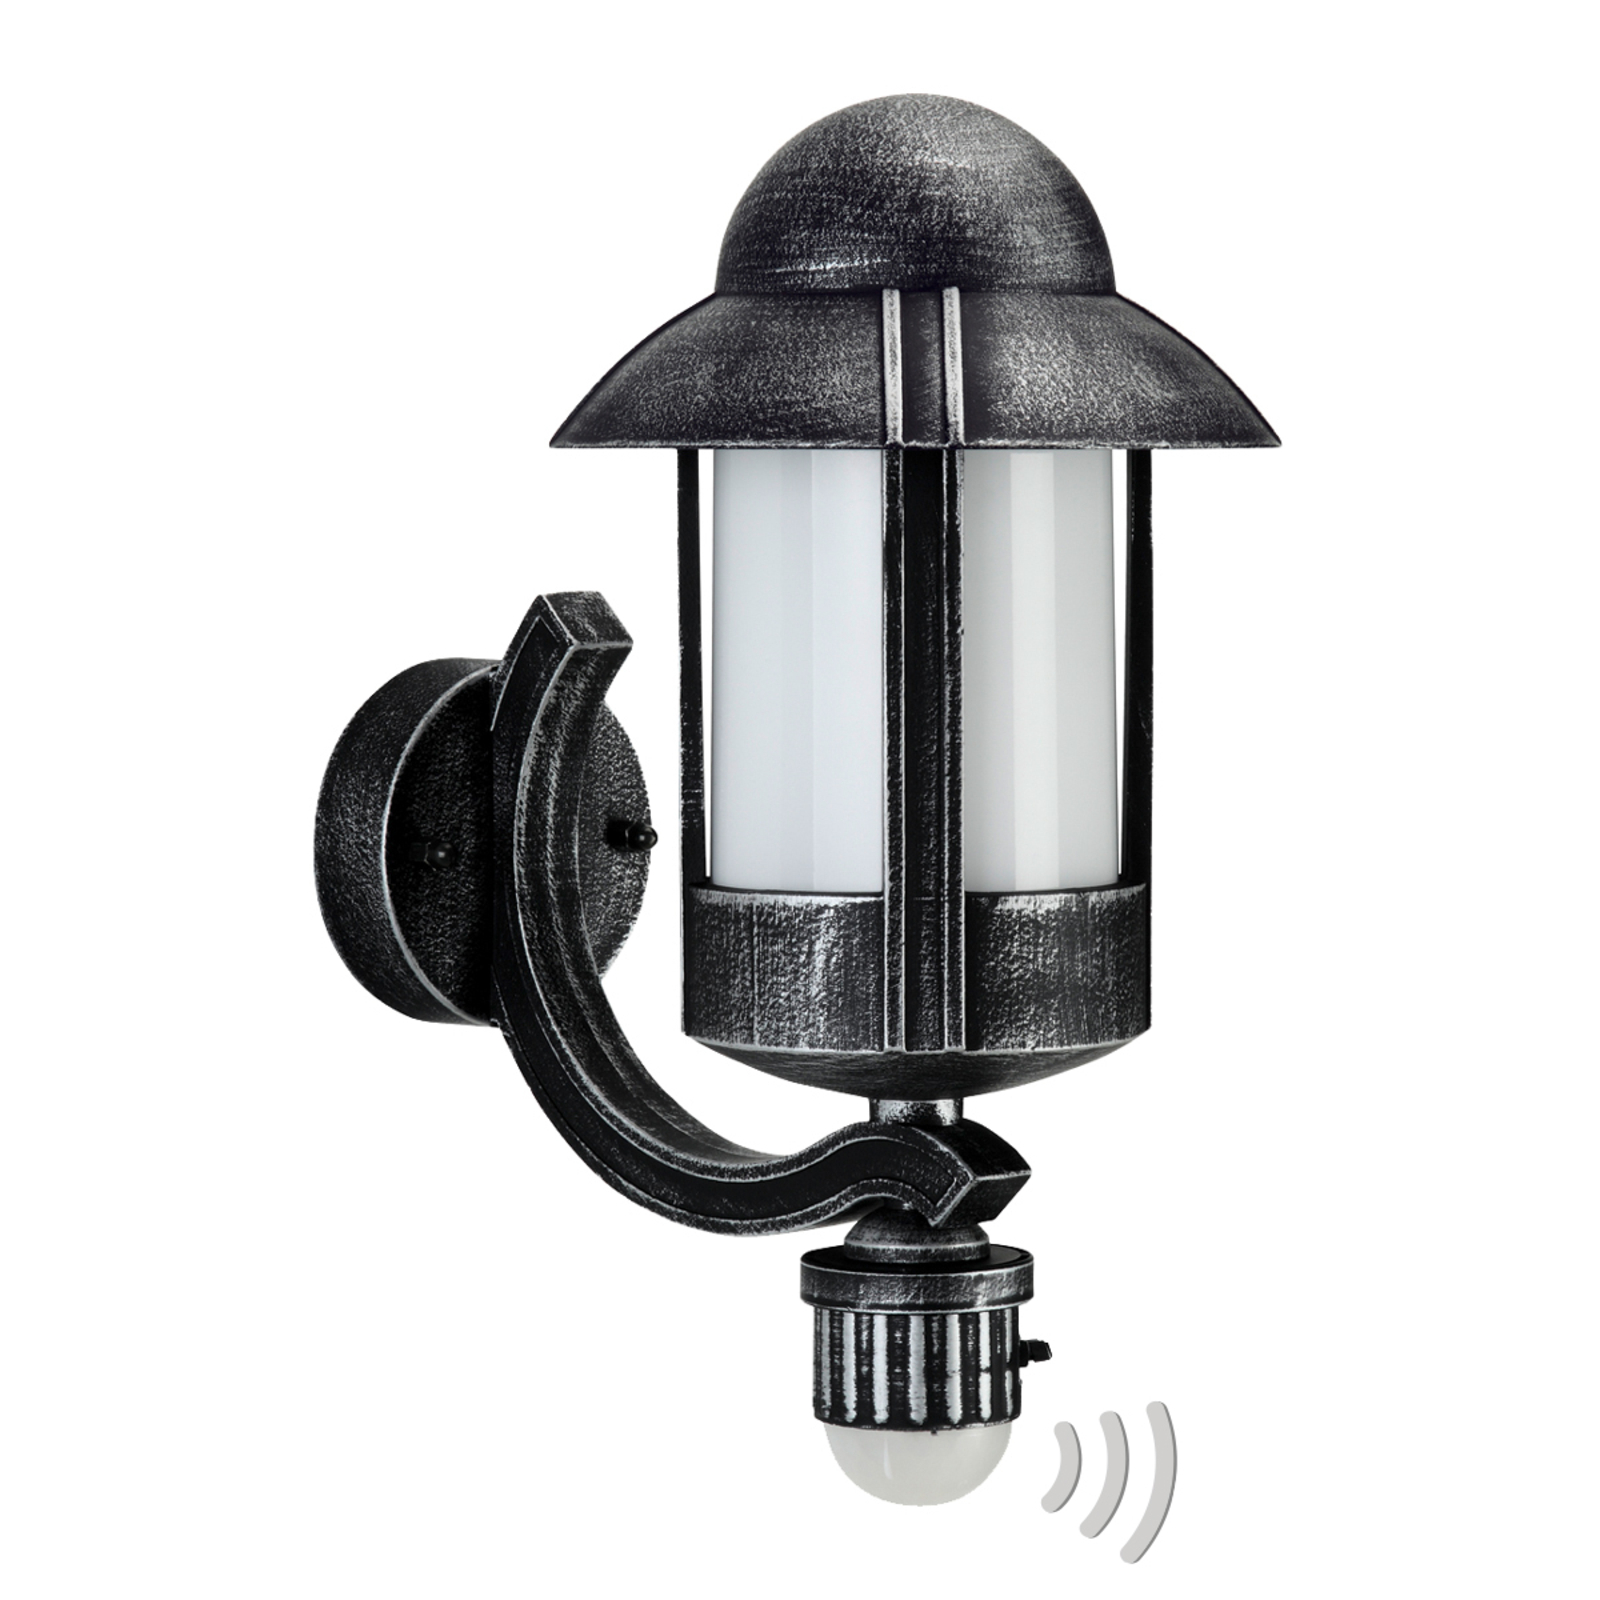 Country-style Dorothee outdoor wall light, black